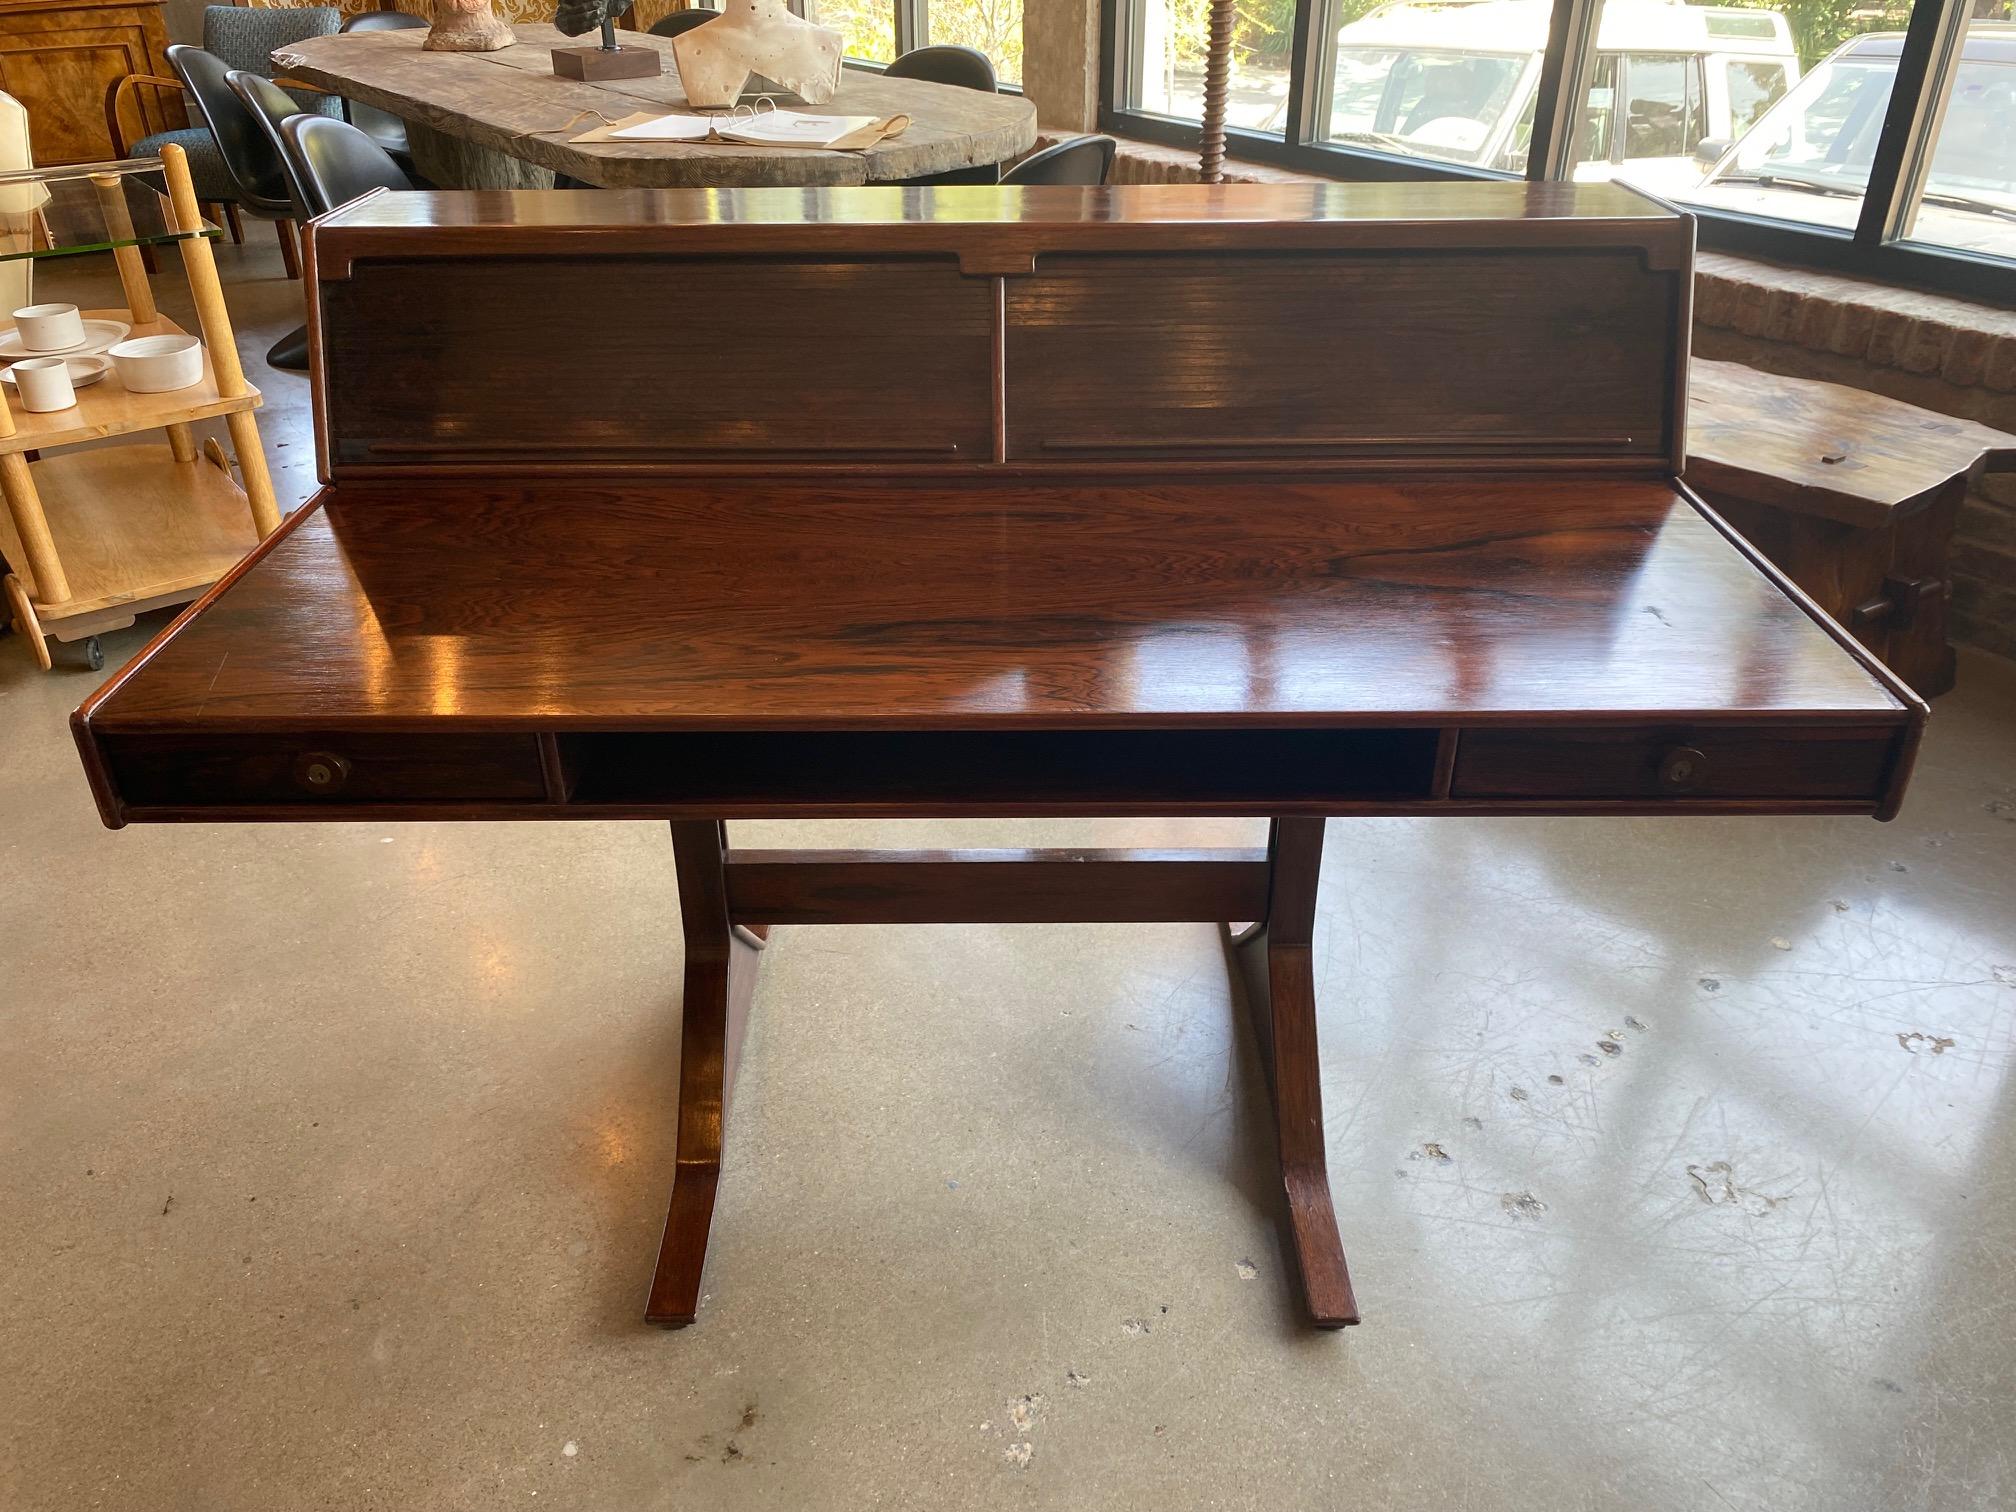 Gianfranco Frattini rosewood desk model 530, designed and manufactured by Bernini, Italy 1957. This desk is made of nicely grained rosewood and cherrywood veneer and is finished on all sides.  Well crafted tambour door storage units sit atop the